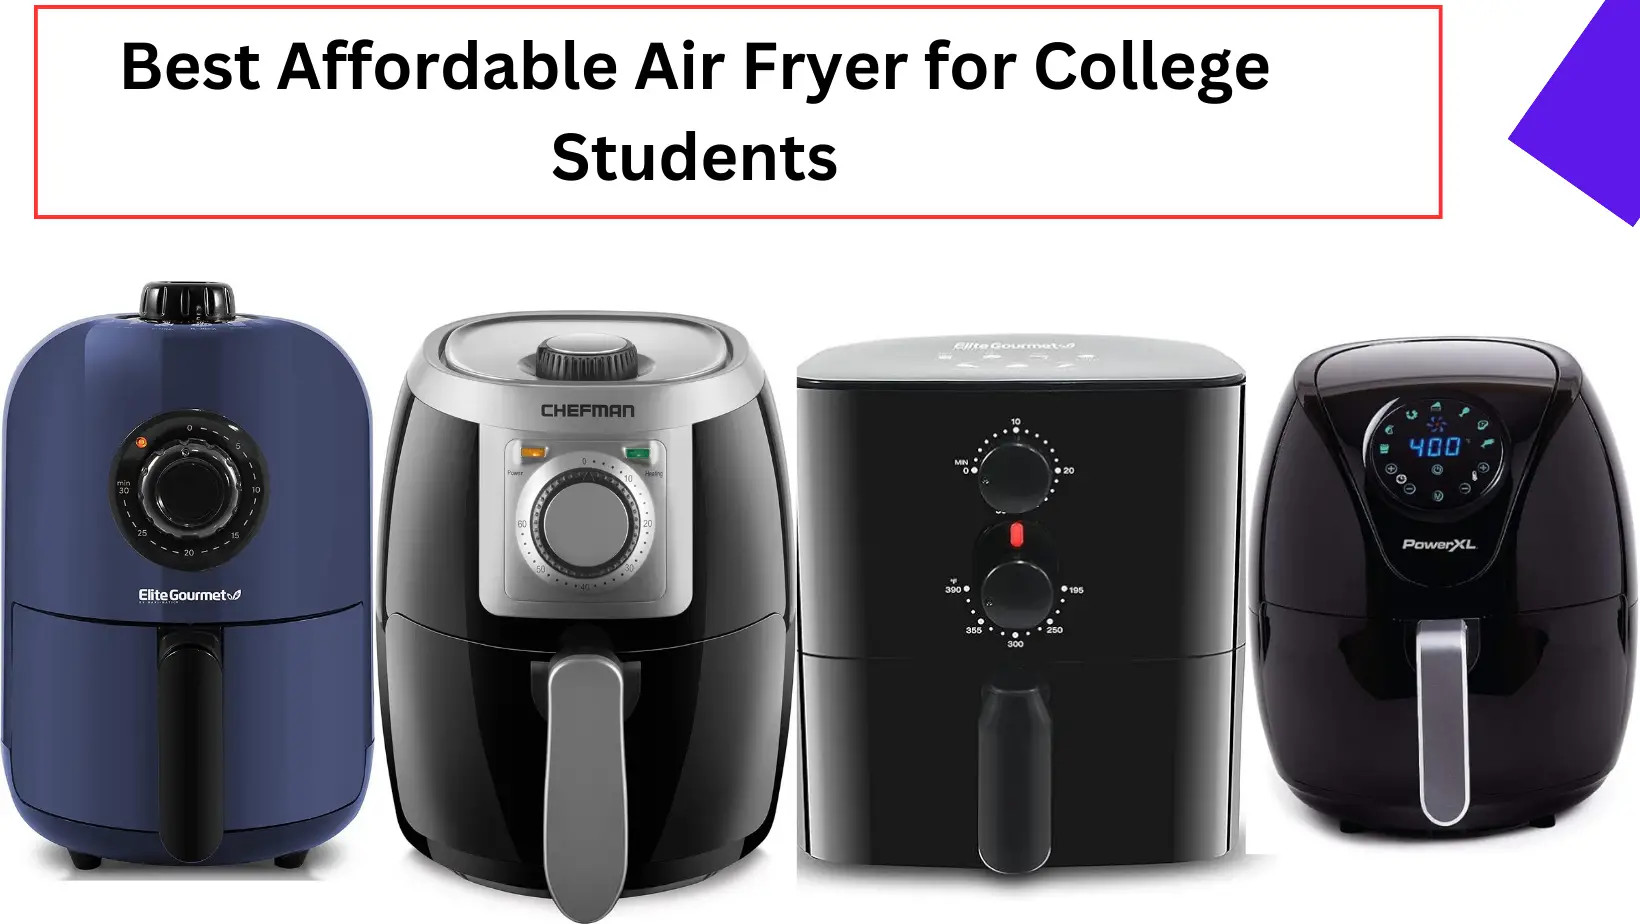 Best Compact and Affordable Air Fryer for College Students